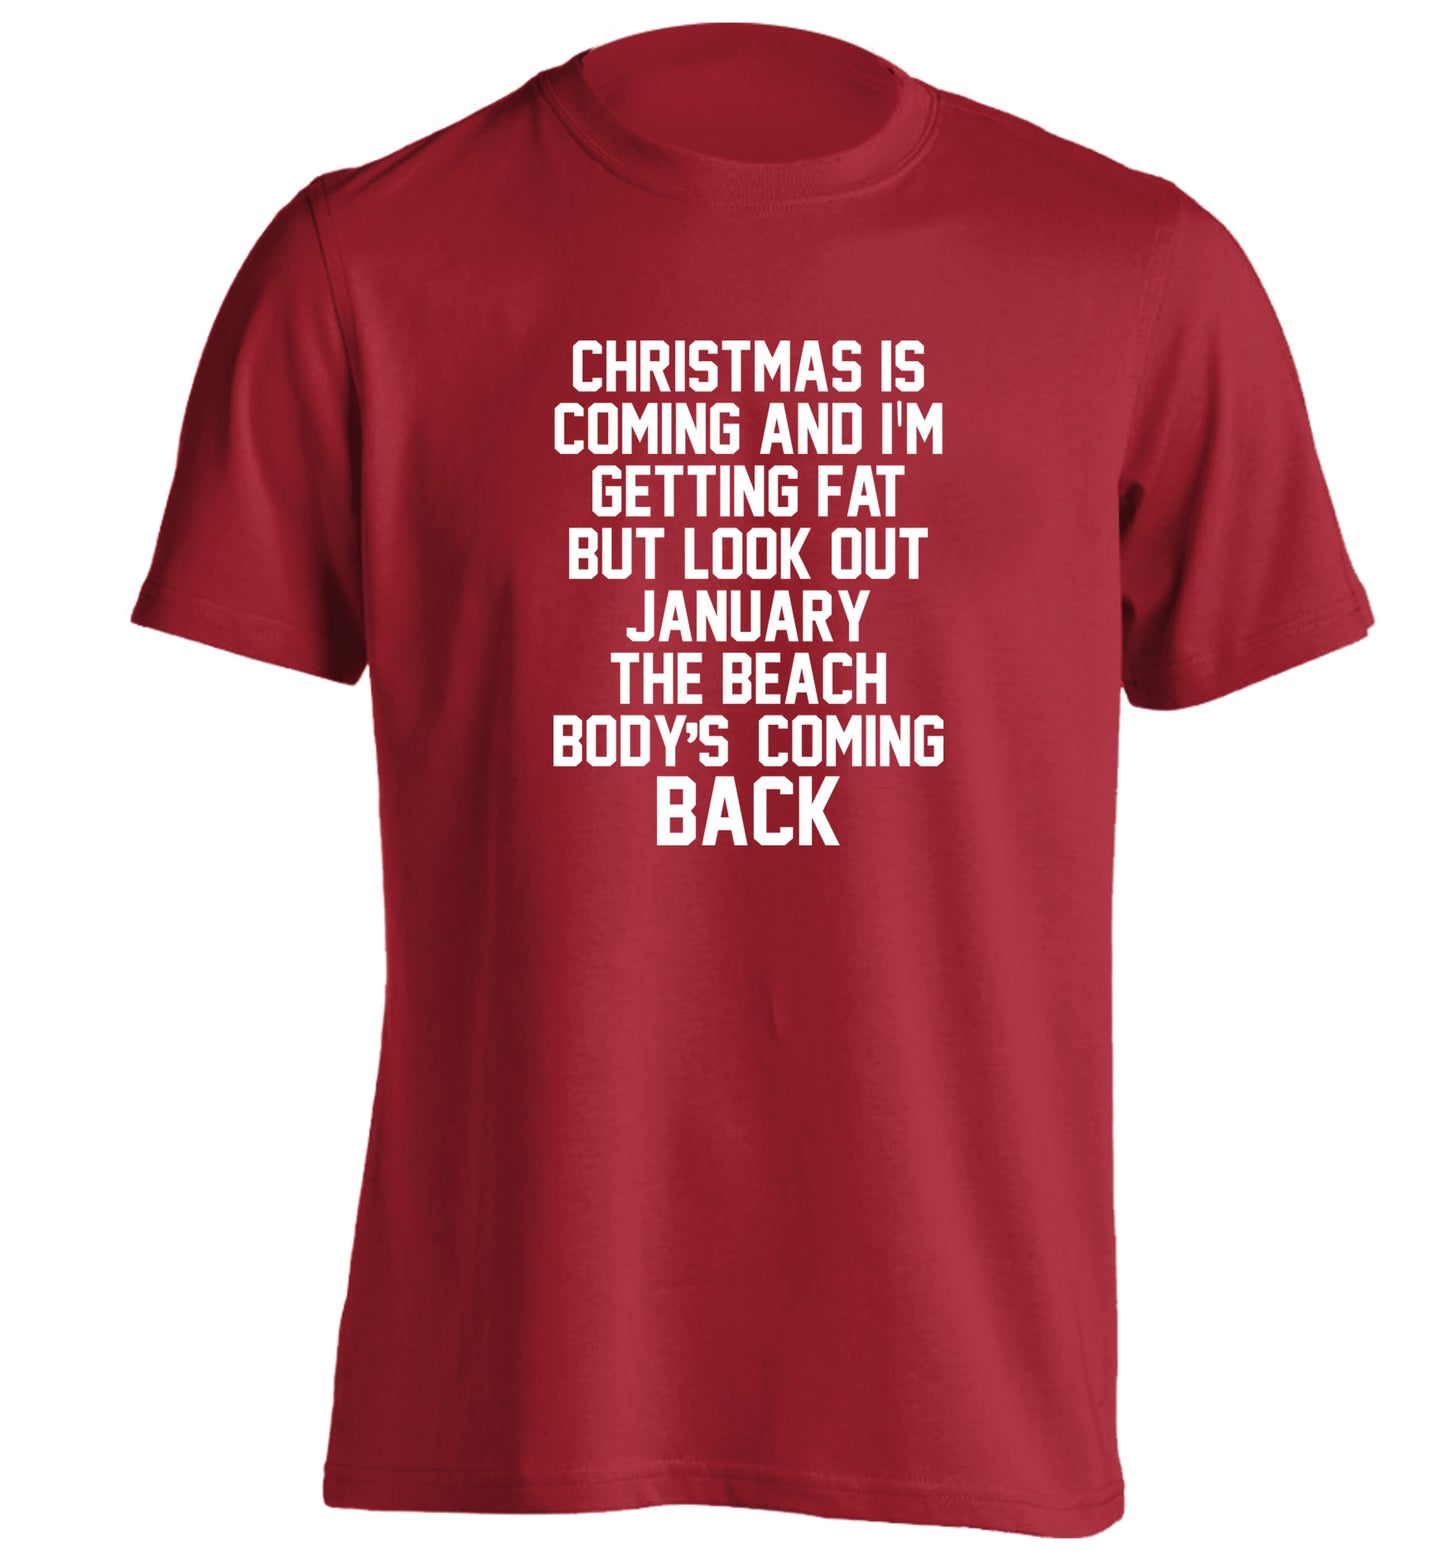 Christmas is coming and I'm getting fat but look out January the beach body's coming back! adults unisex red Tshirt 2XL